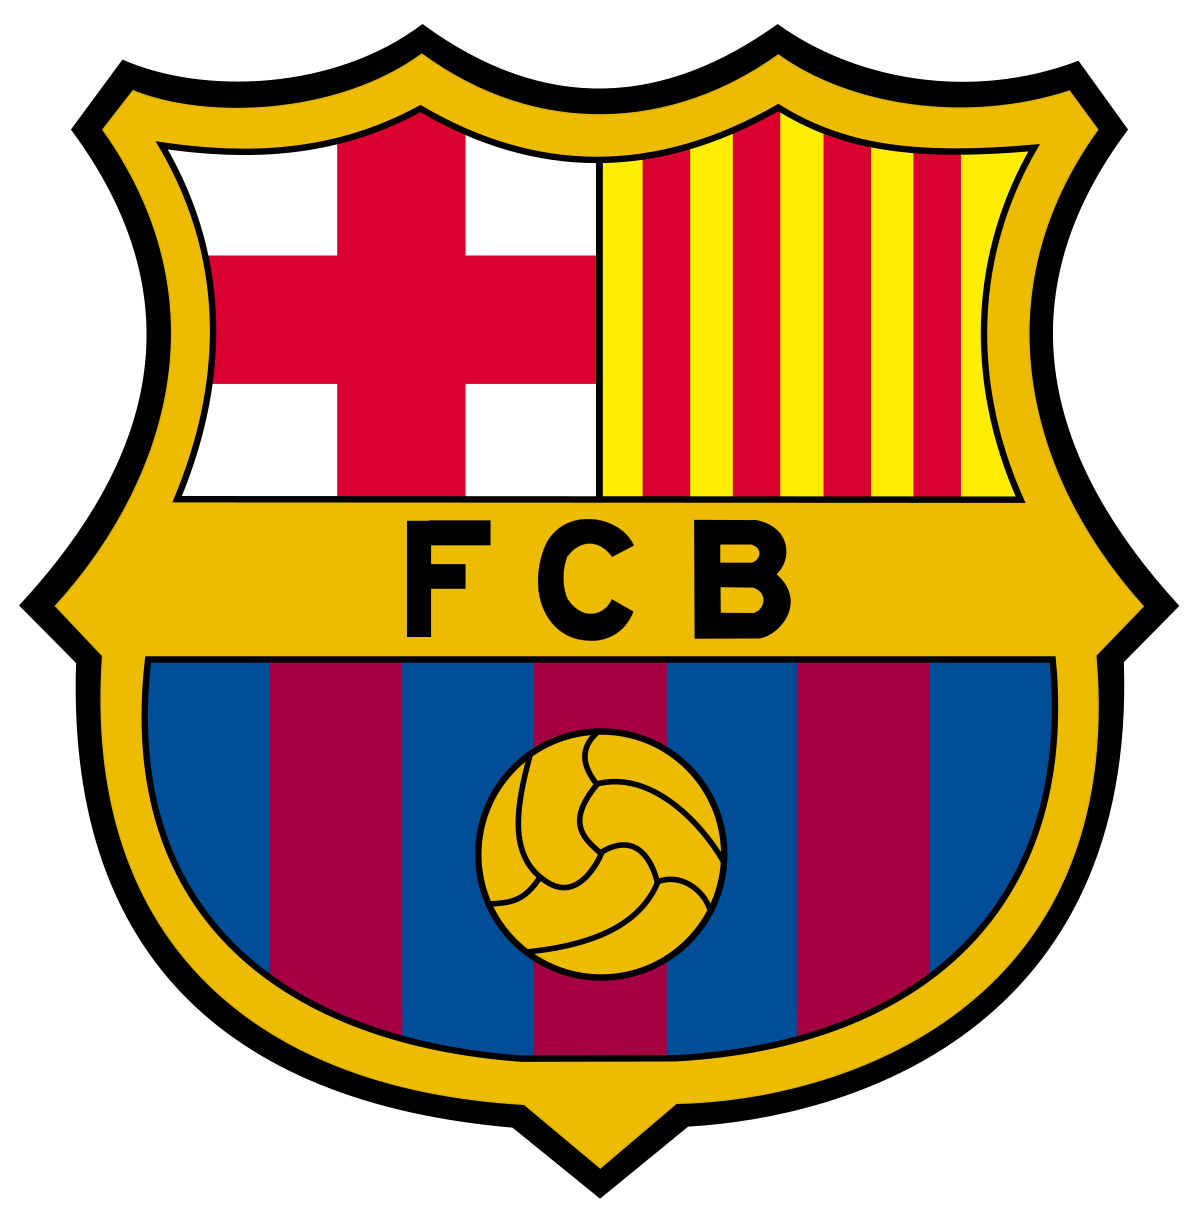 Barcelona Fc Color Codes Hex Rgb And Cmyk Team Color Codes